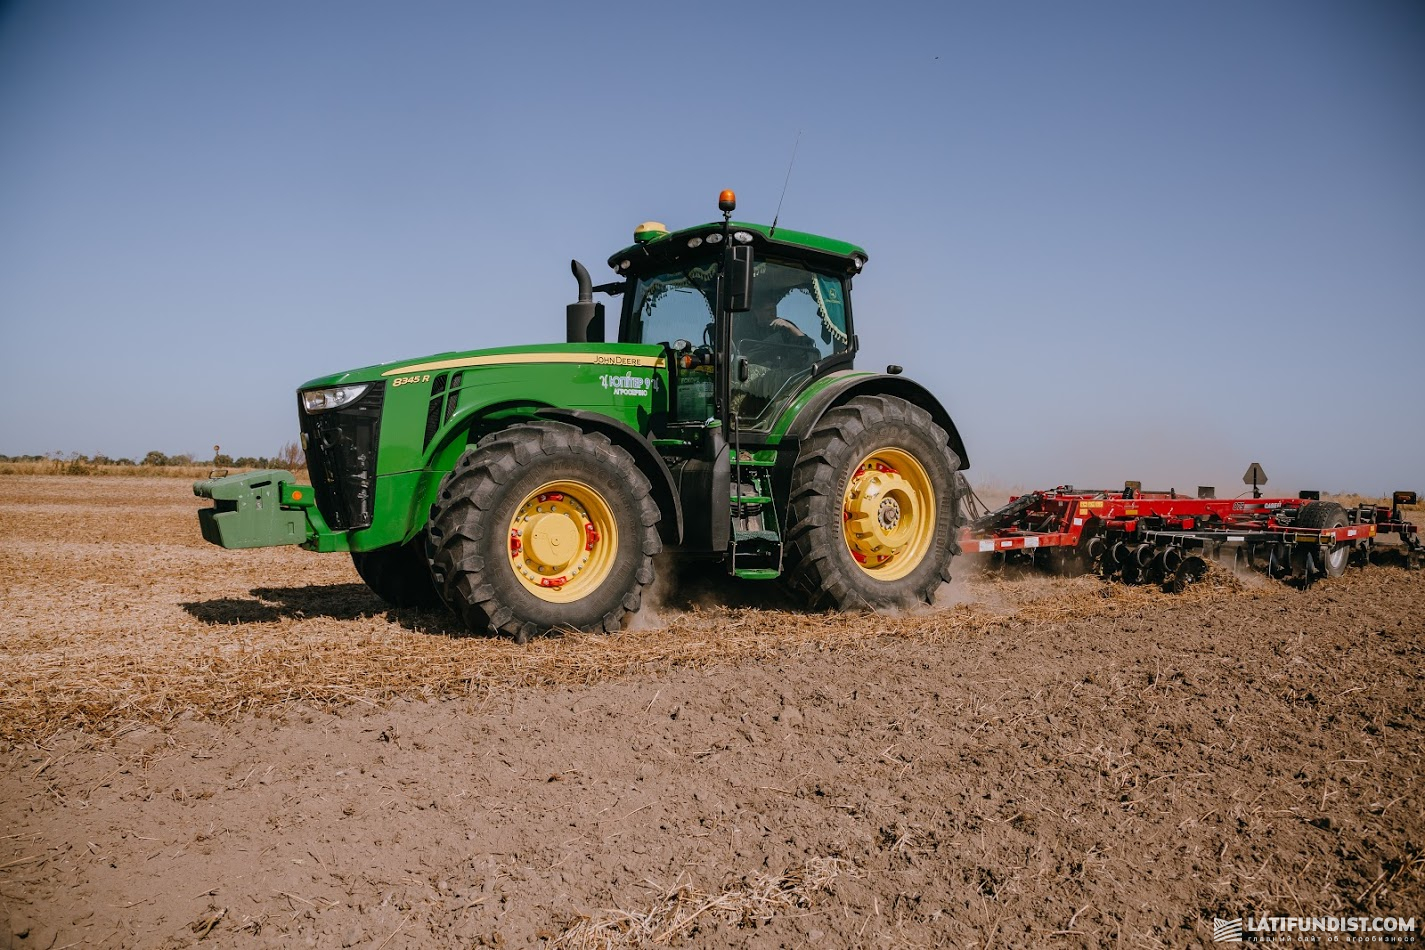 A.G.R. Group machinery: disc harrows towed behind a John Deere 8345R tractor